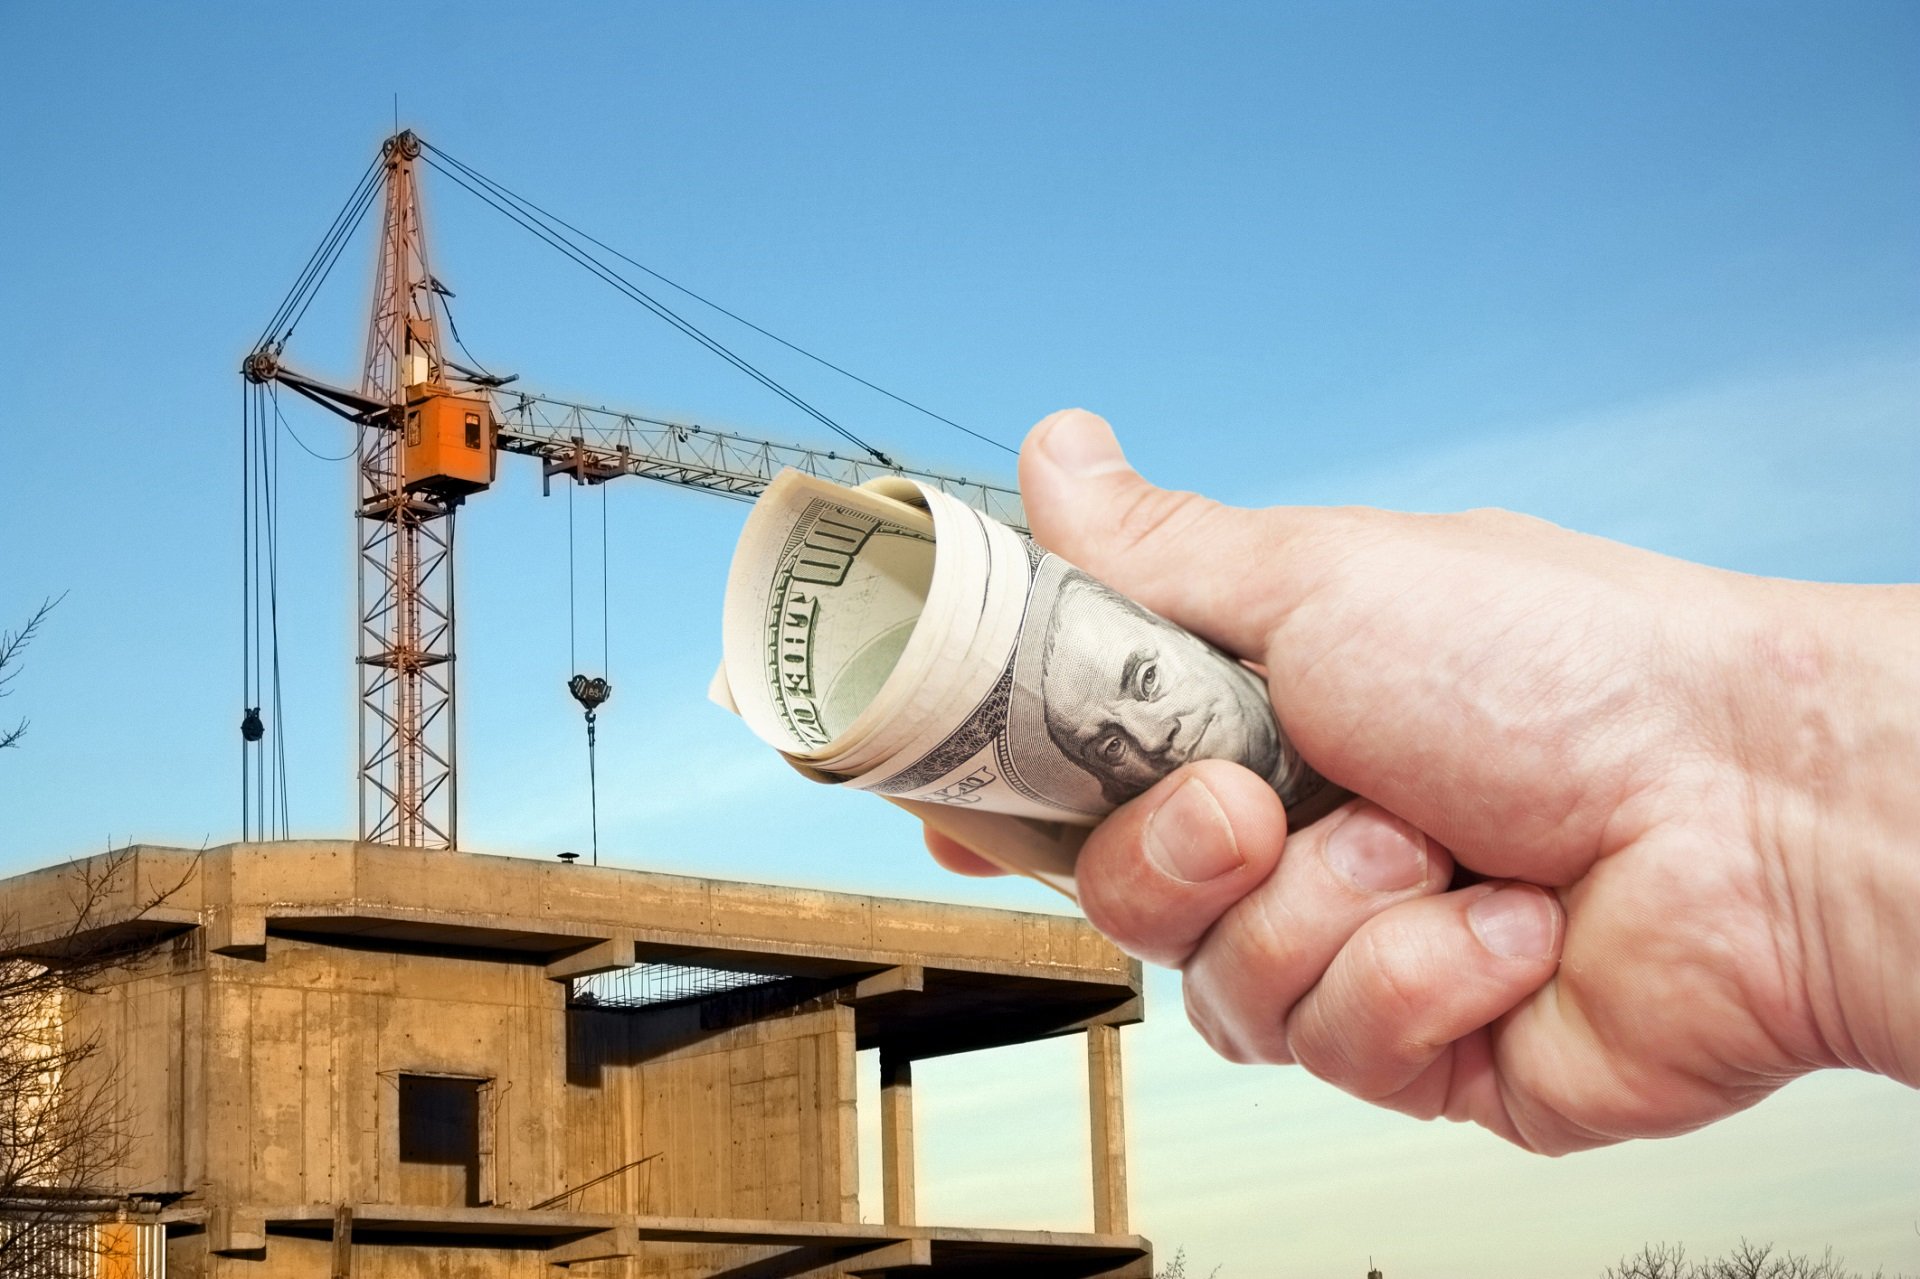 Construction funding where the money comes from